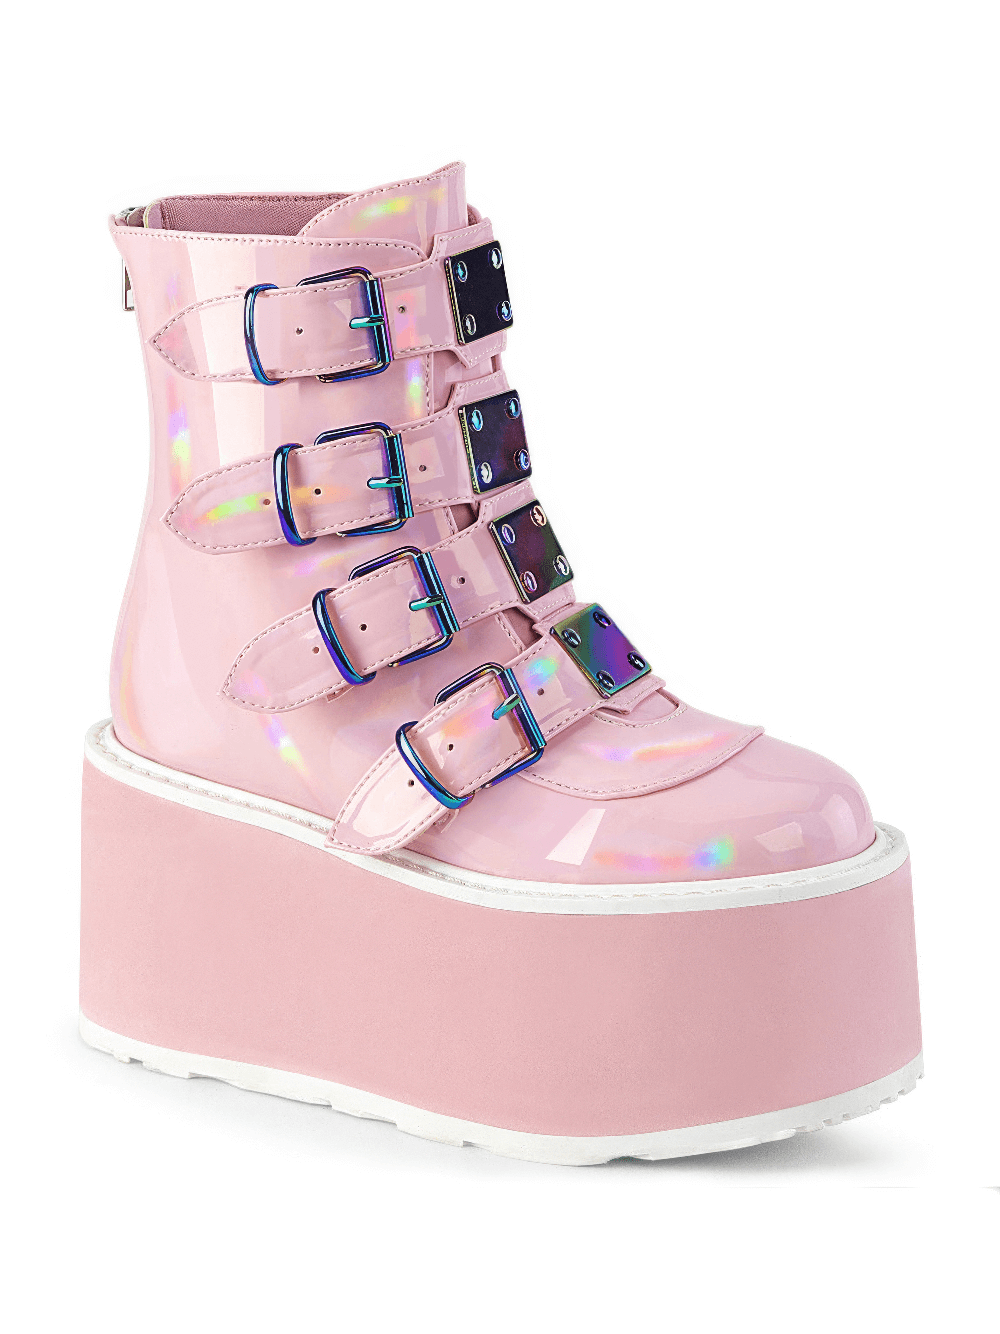 DEMONIA Iridescent Pink Holo Ankle Boots with Metal Accents